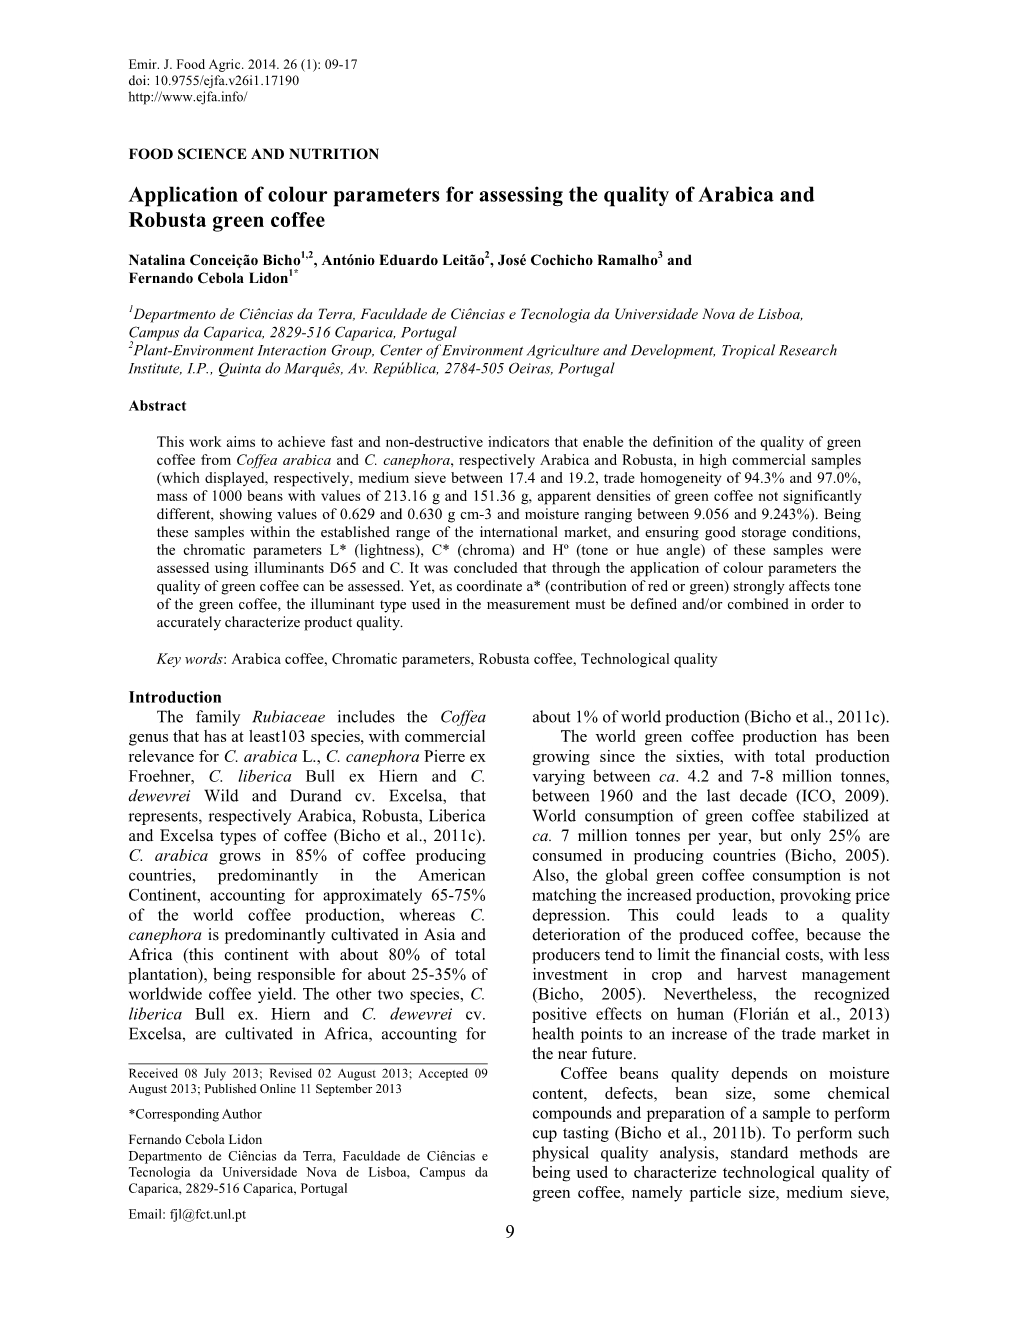 Application of Colour Parameters for Assessing the Quality of Arabica and Robusta Green Coffee